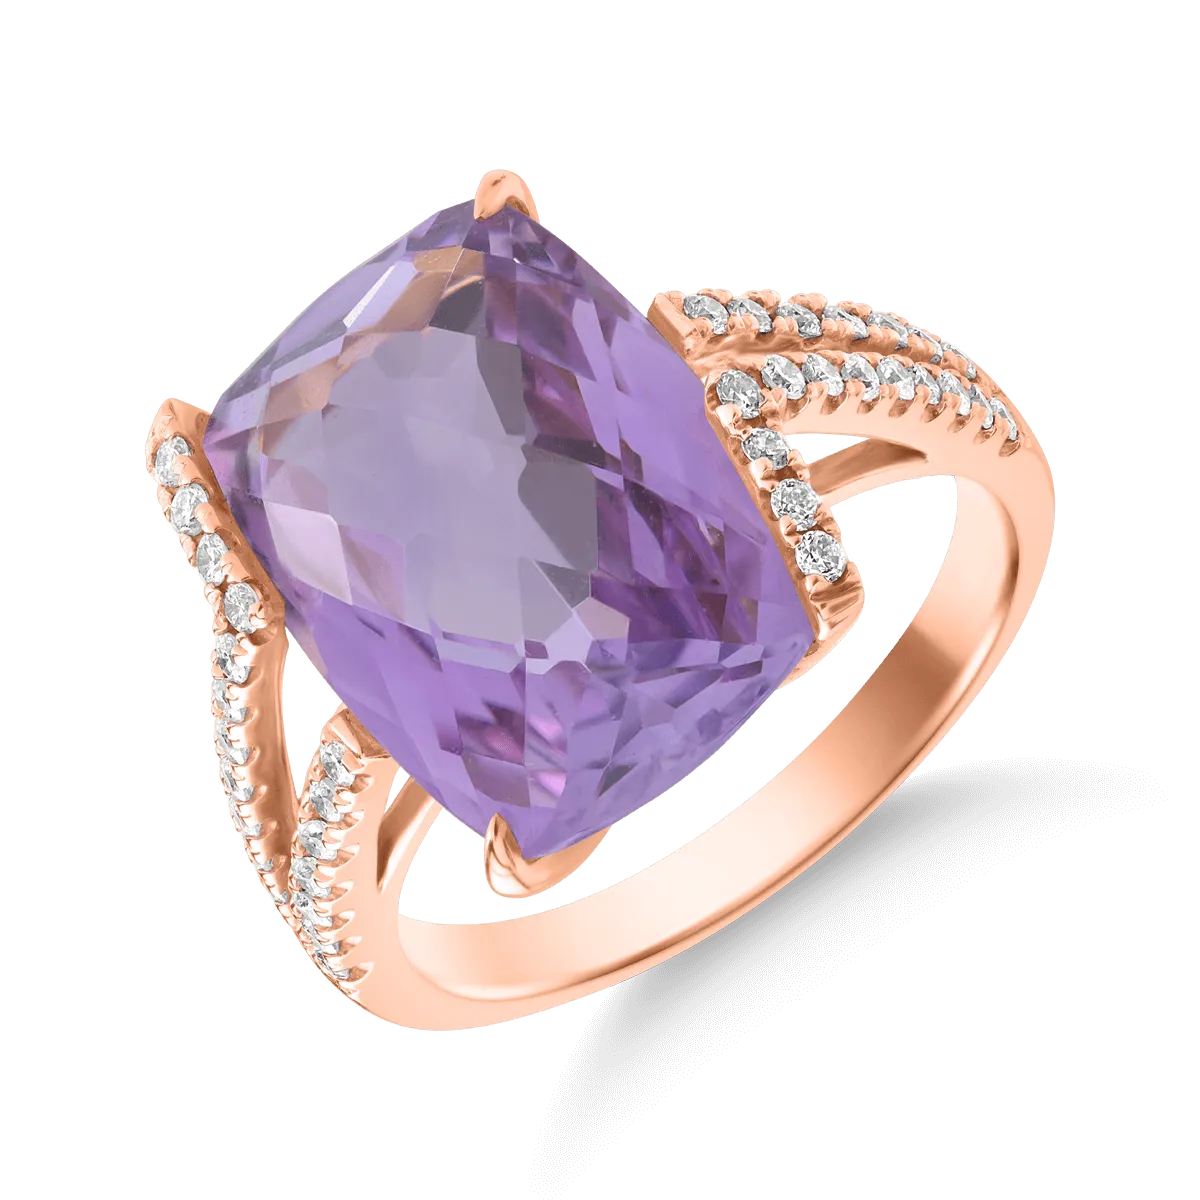 18K rose gold ring with 7.6ct pink amethyst and 0.25ct diamonds